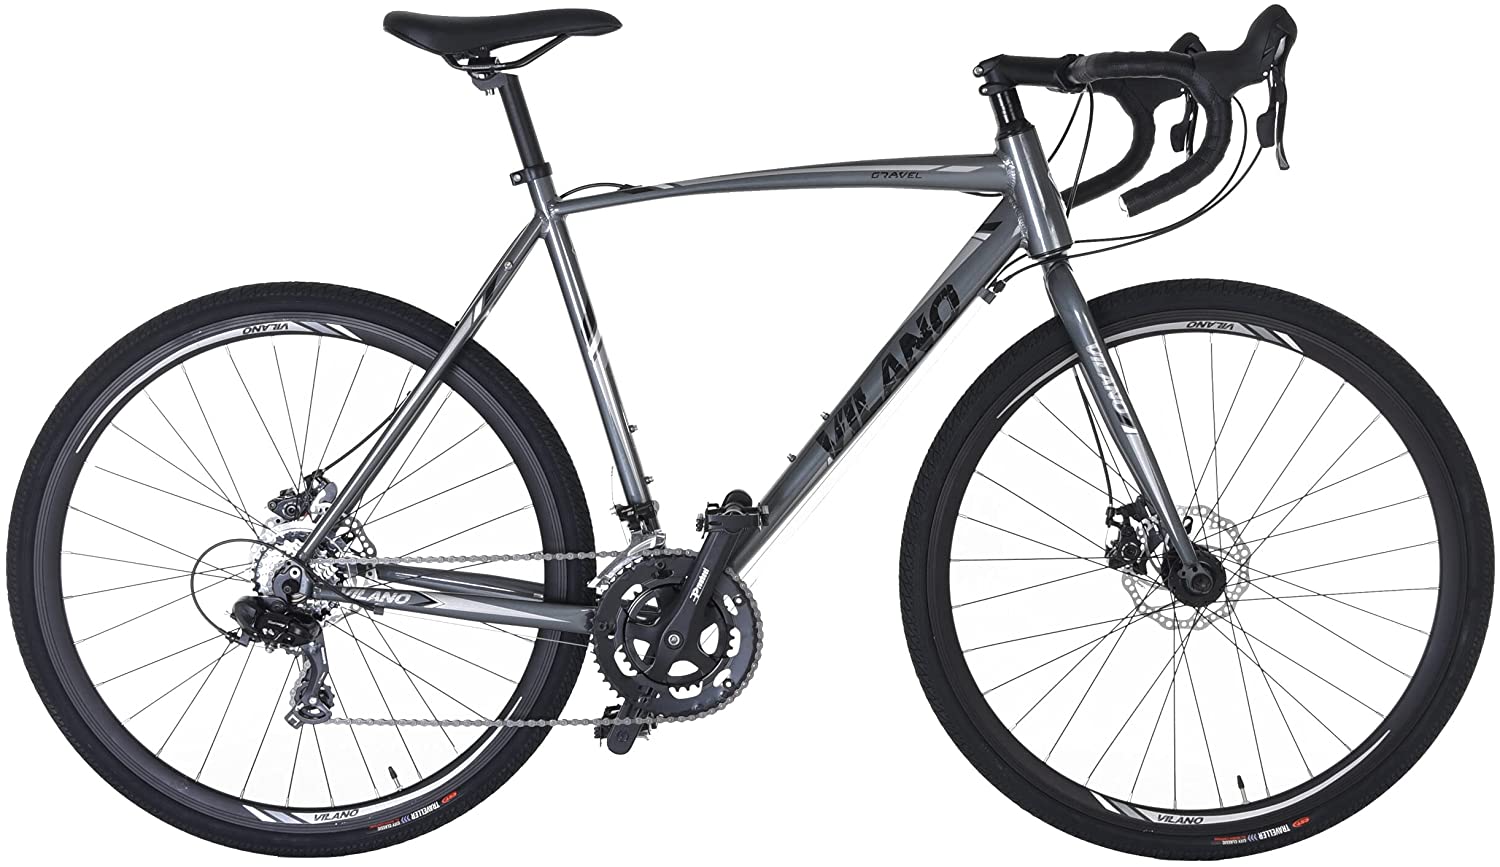 Vilano-Gravel-Bike-with-Disc-Brakes-14-Speeds-Road-and-Trail-Bicycle-Drop-Bars